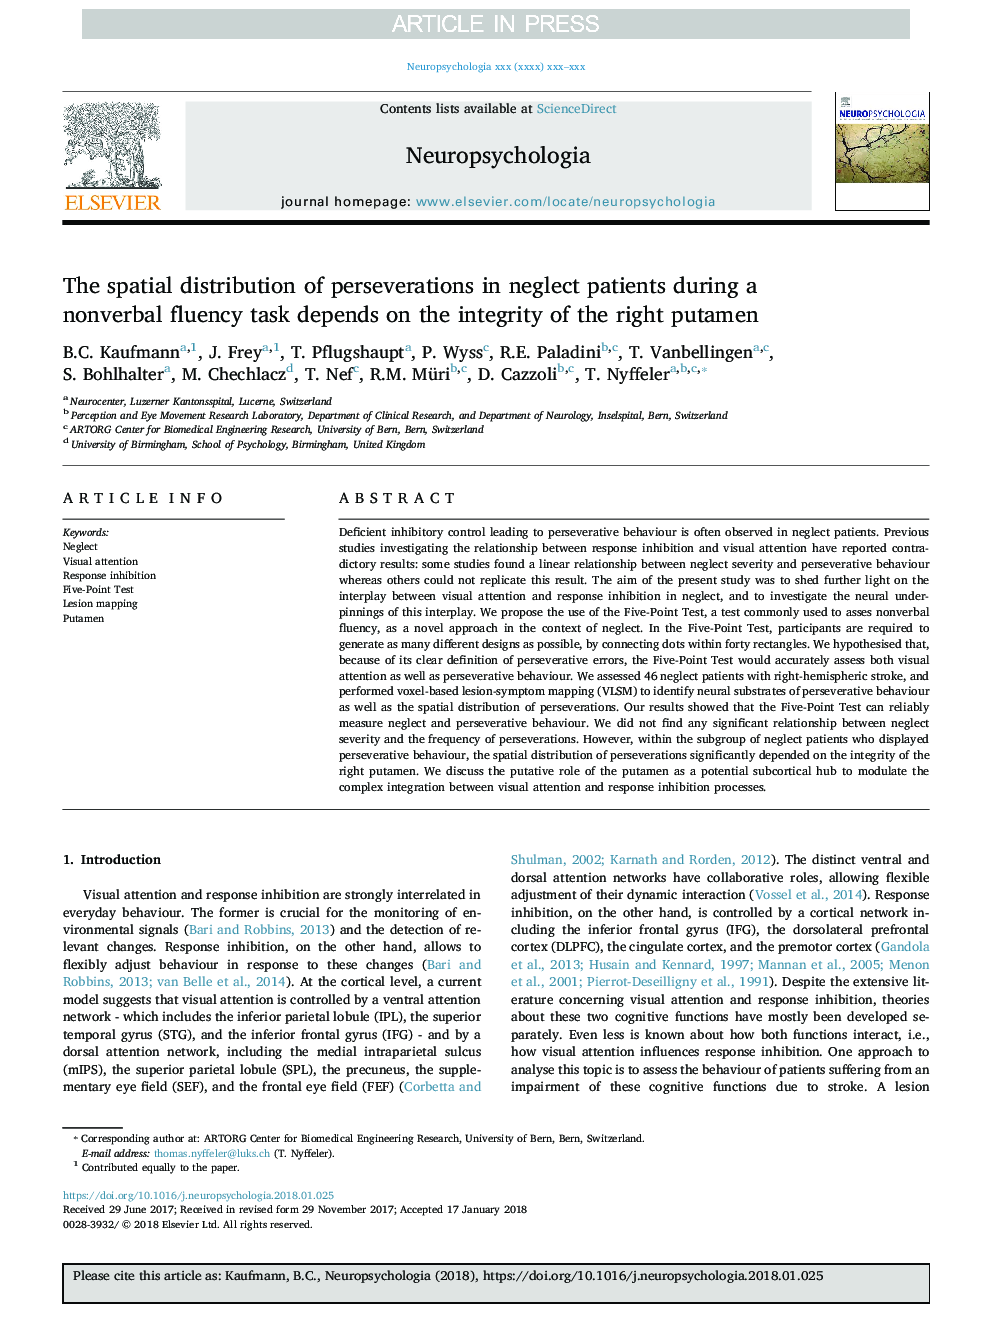 The spatial distribution of perseverations in neglect patients during a nonverbal fluency task depends on the integrity of the right putamen